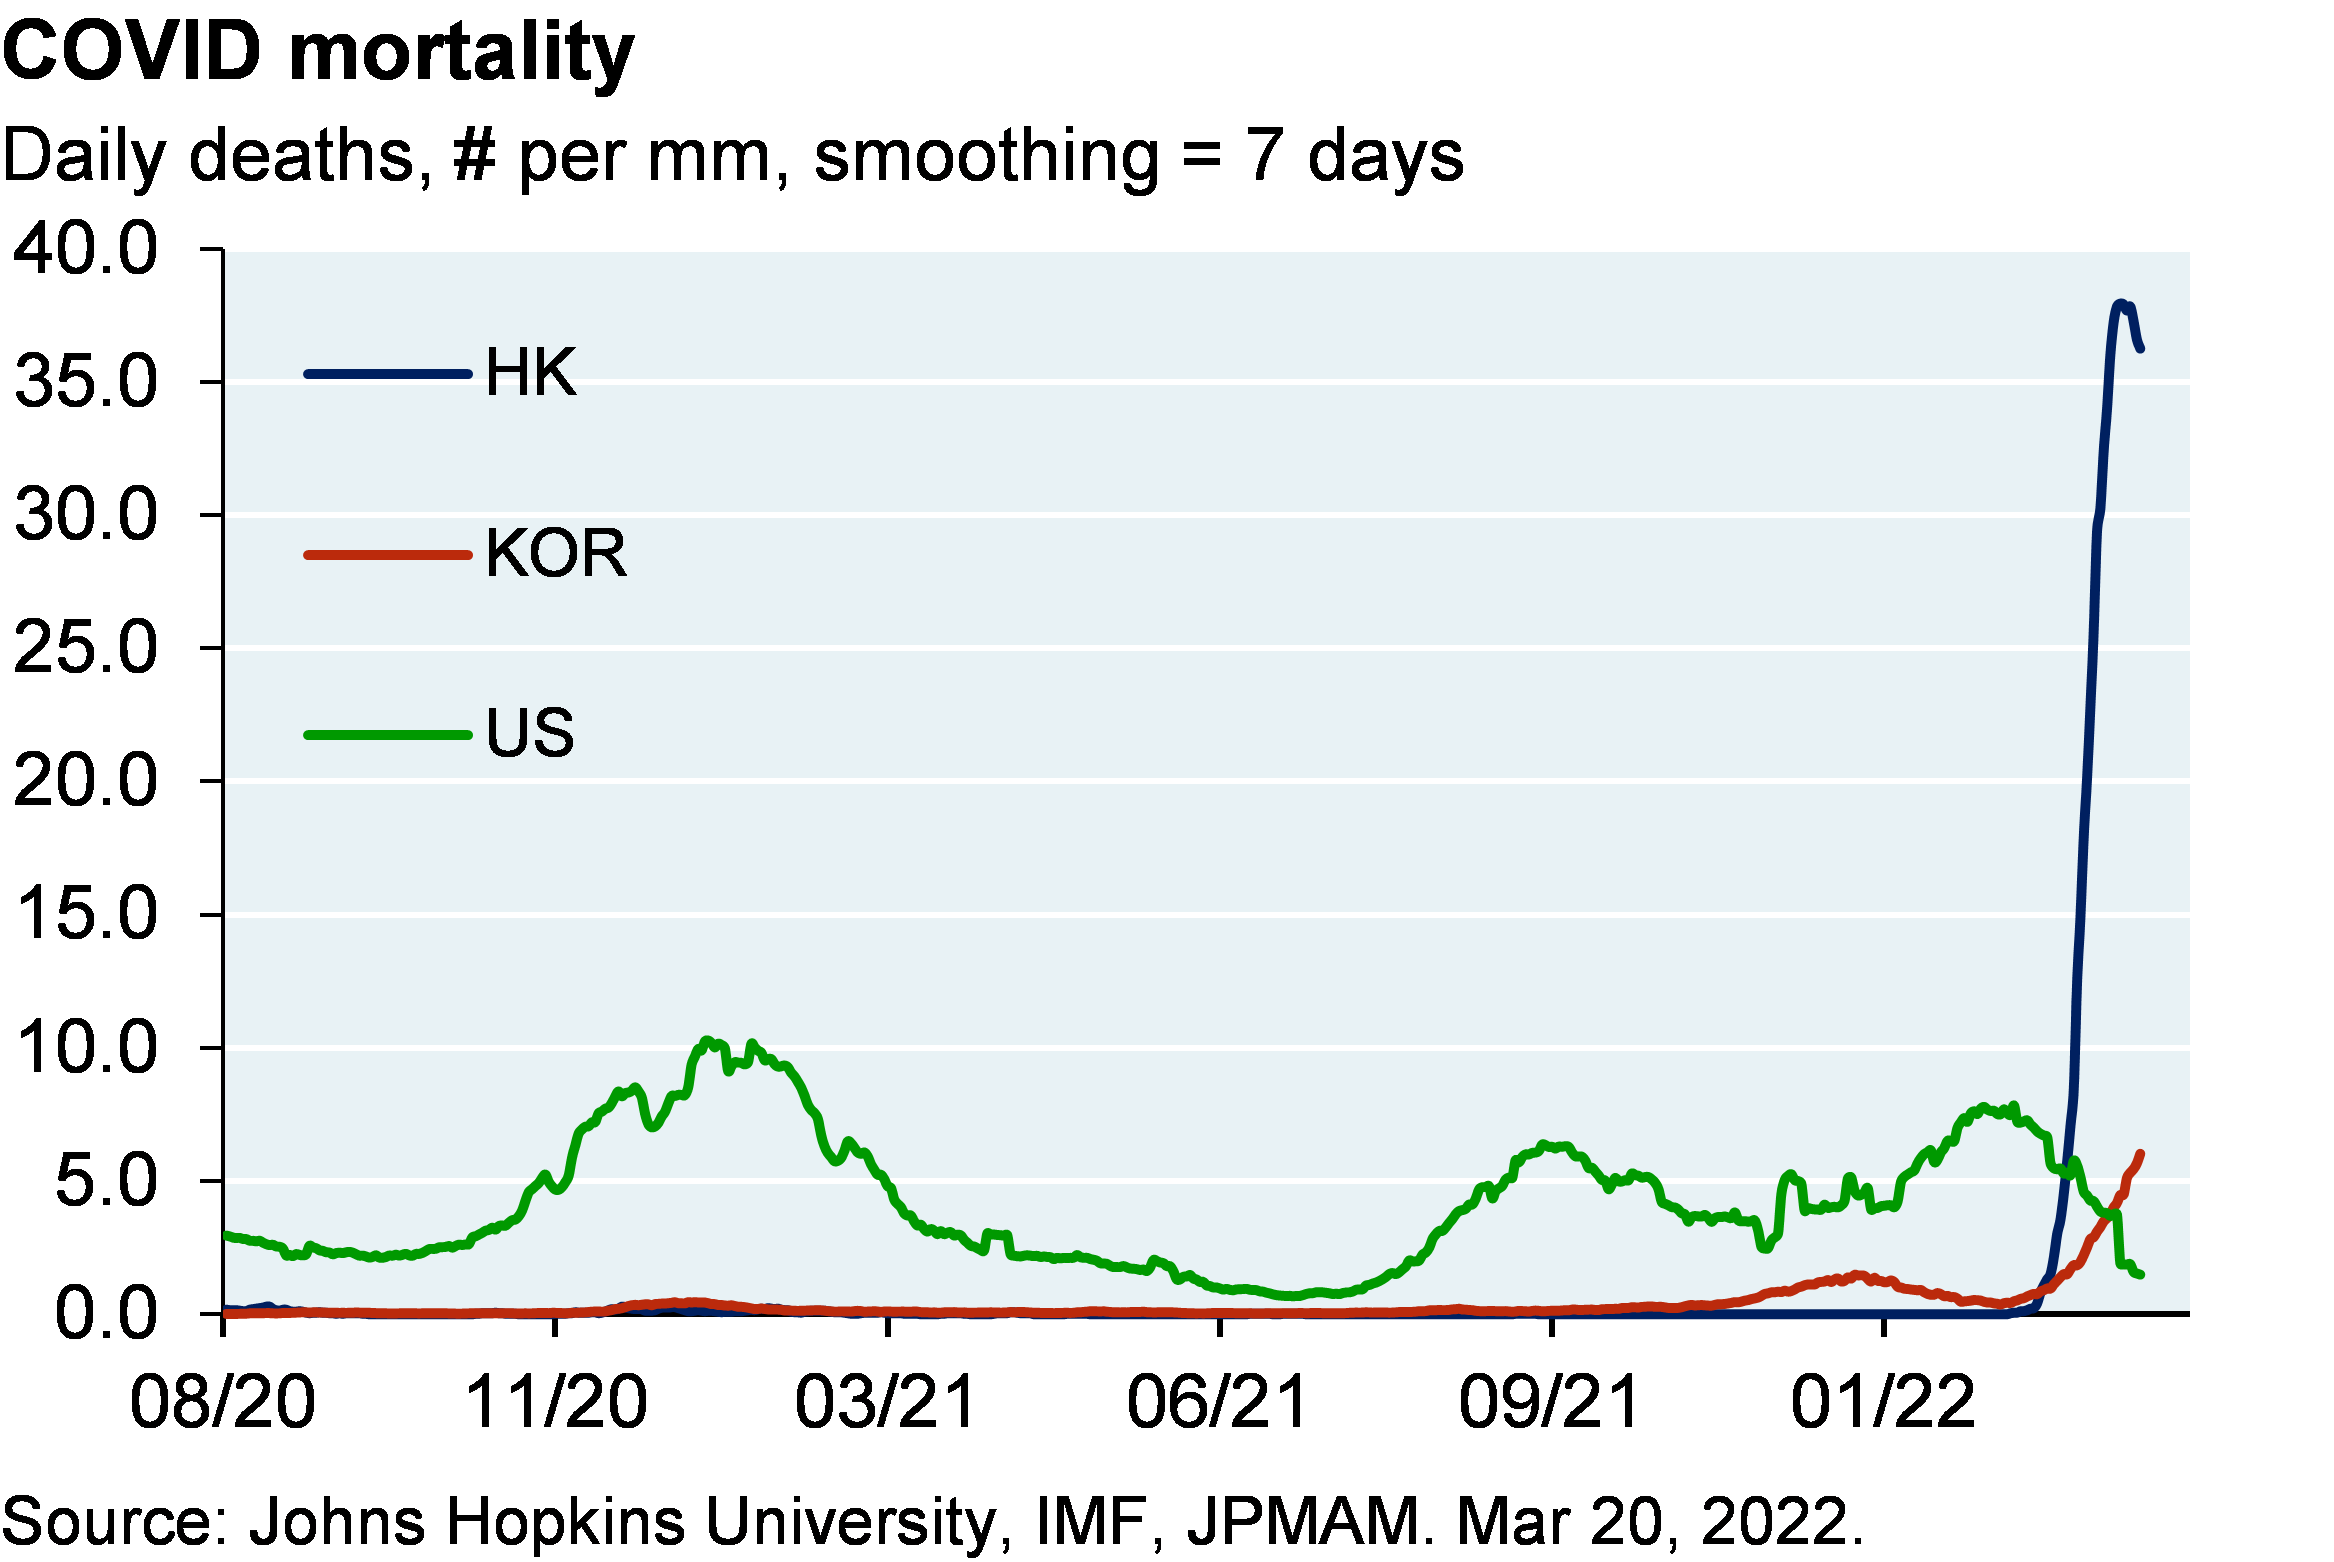 Line chart shows COVID mortality in Honk Kong, Korea and the US from August 2020 to now.